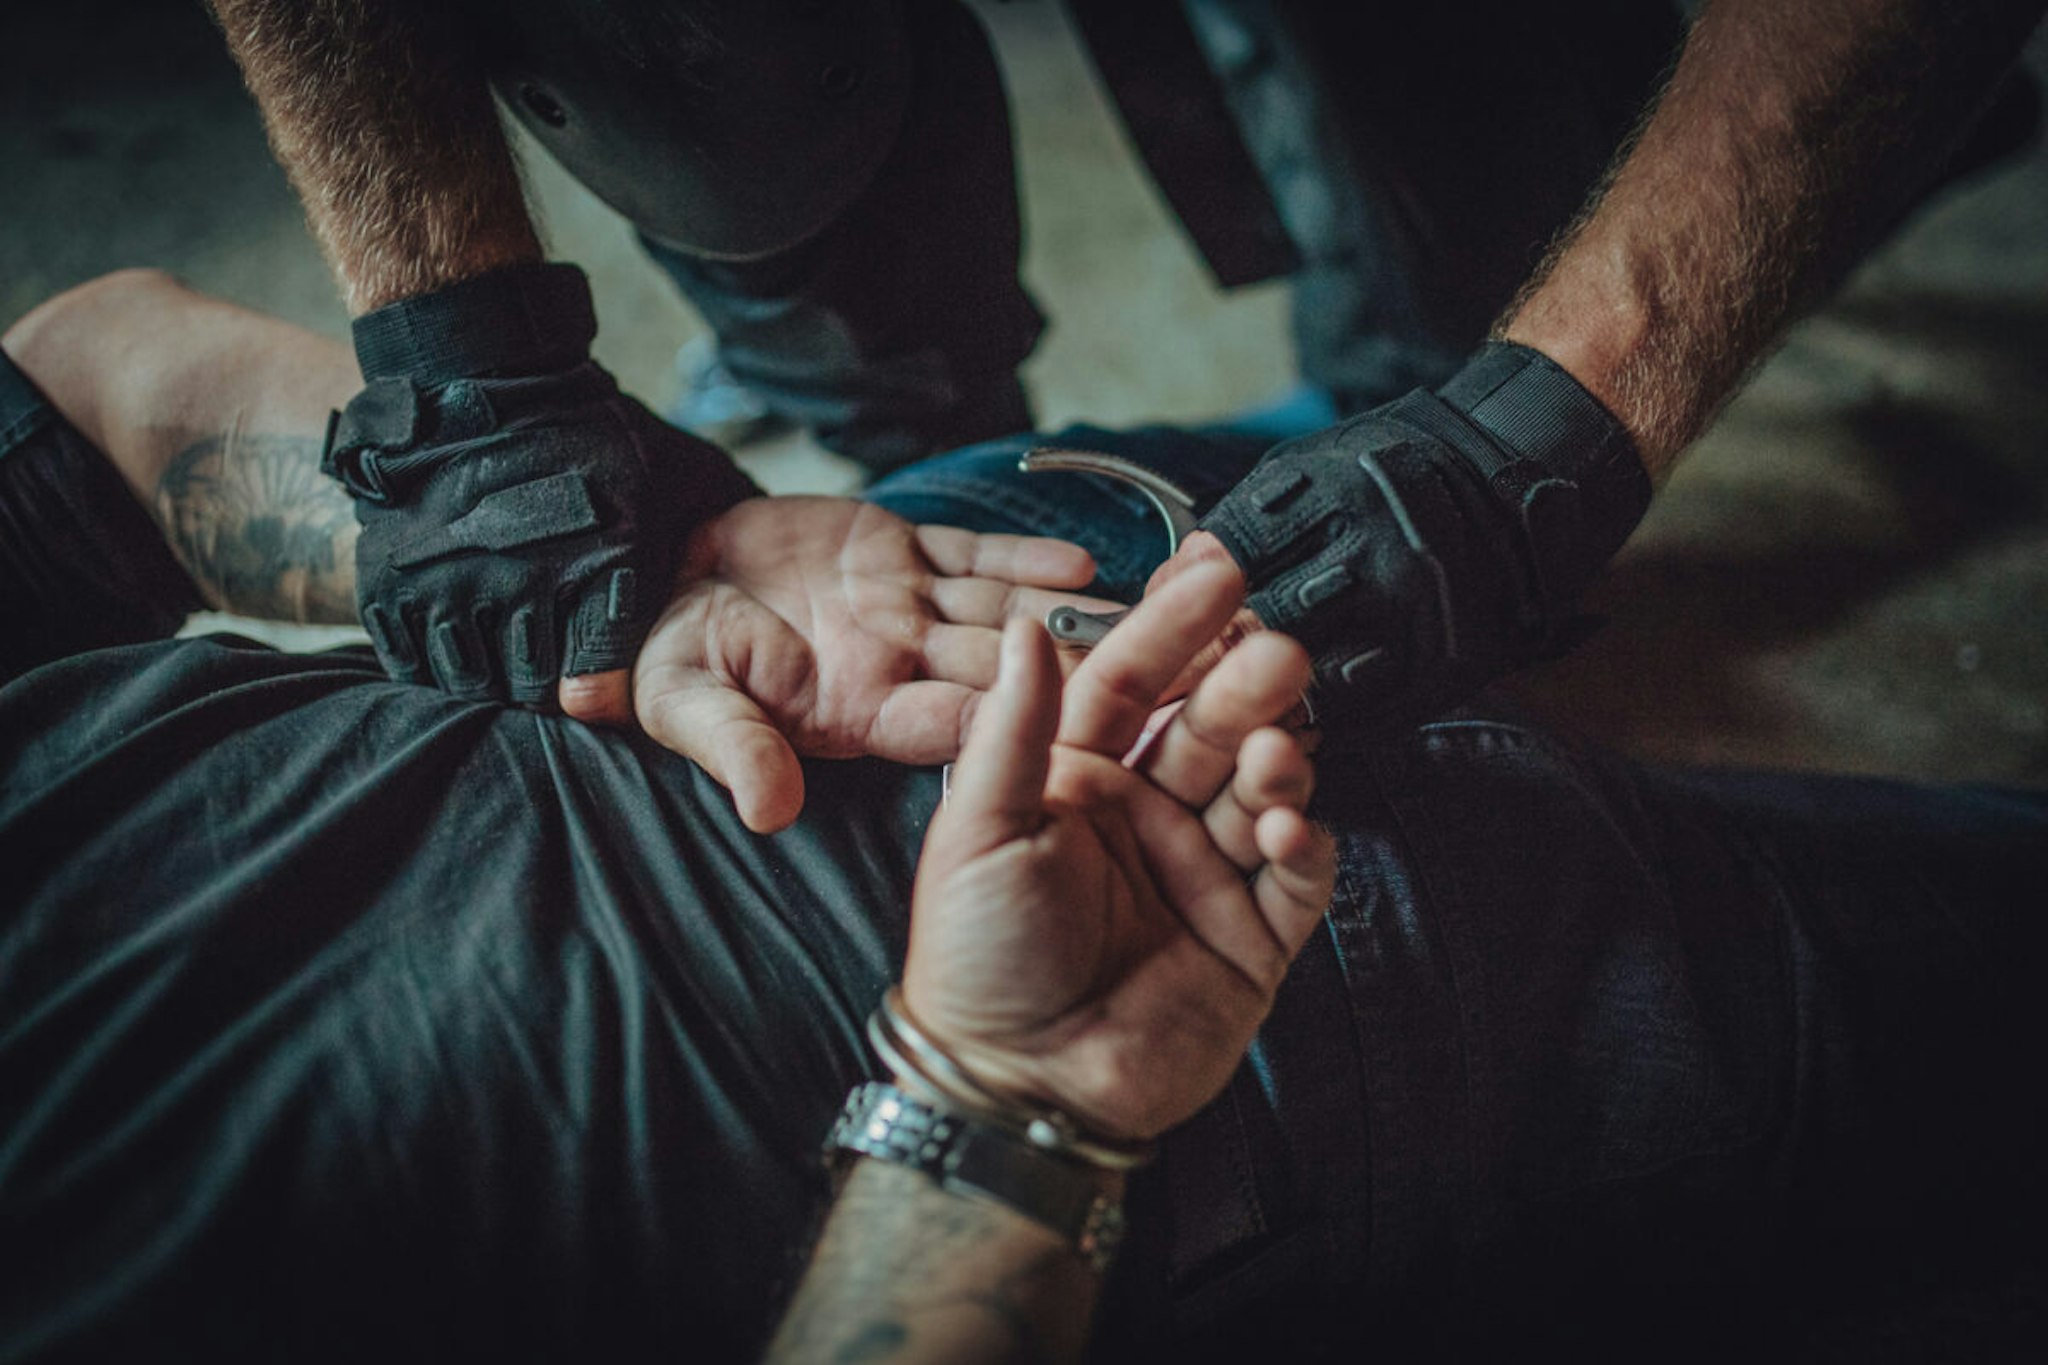 Police putting handcuffs on a man - stock photo